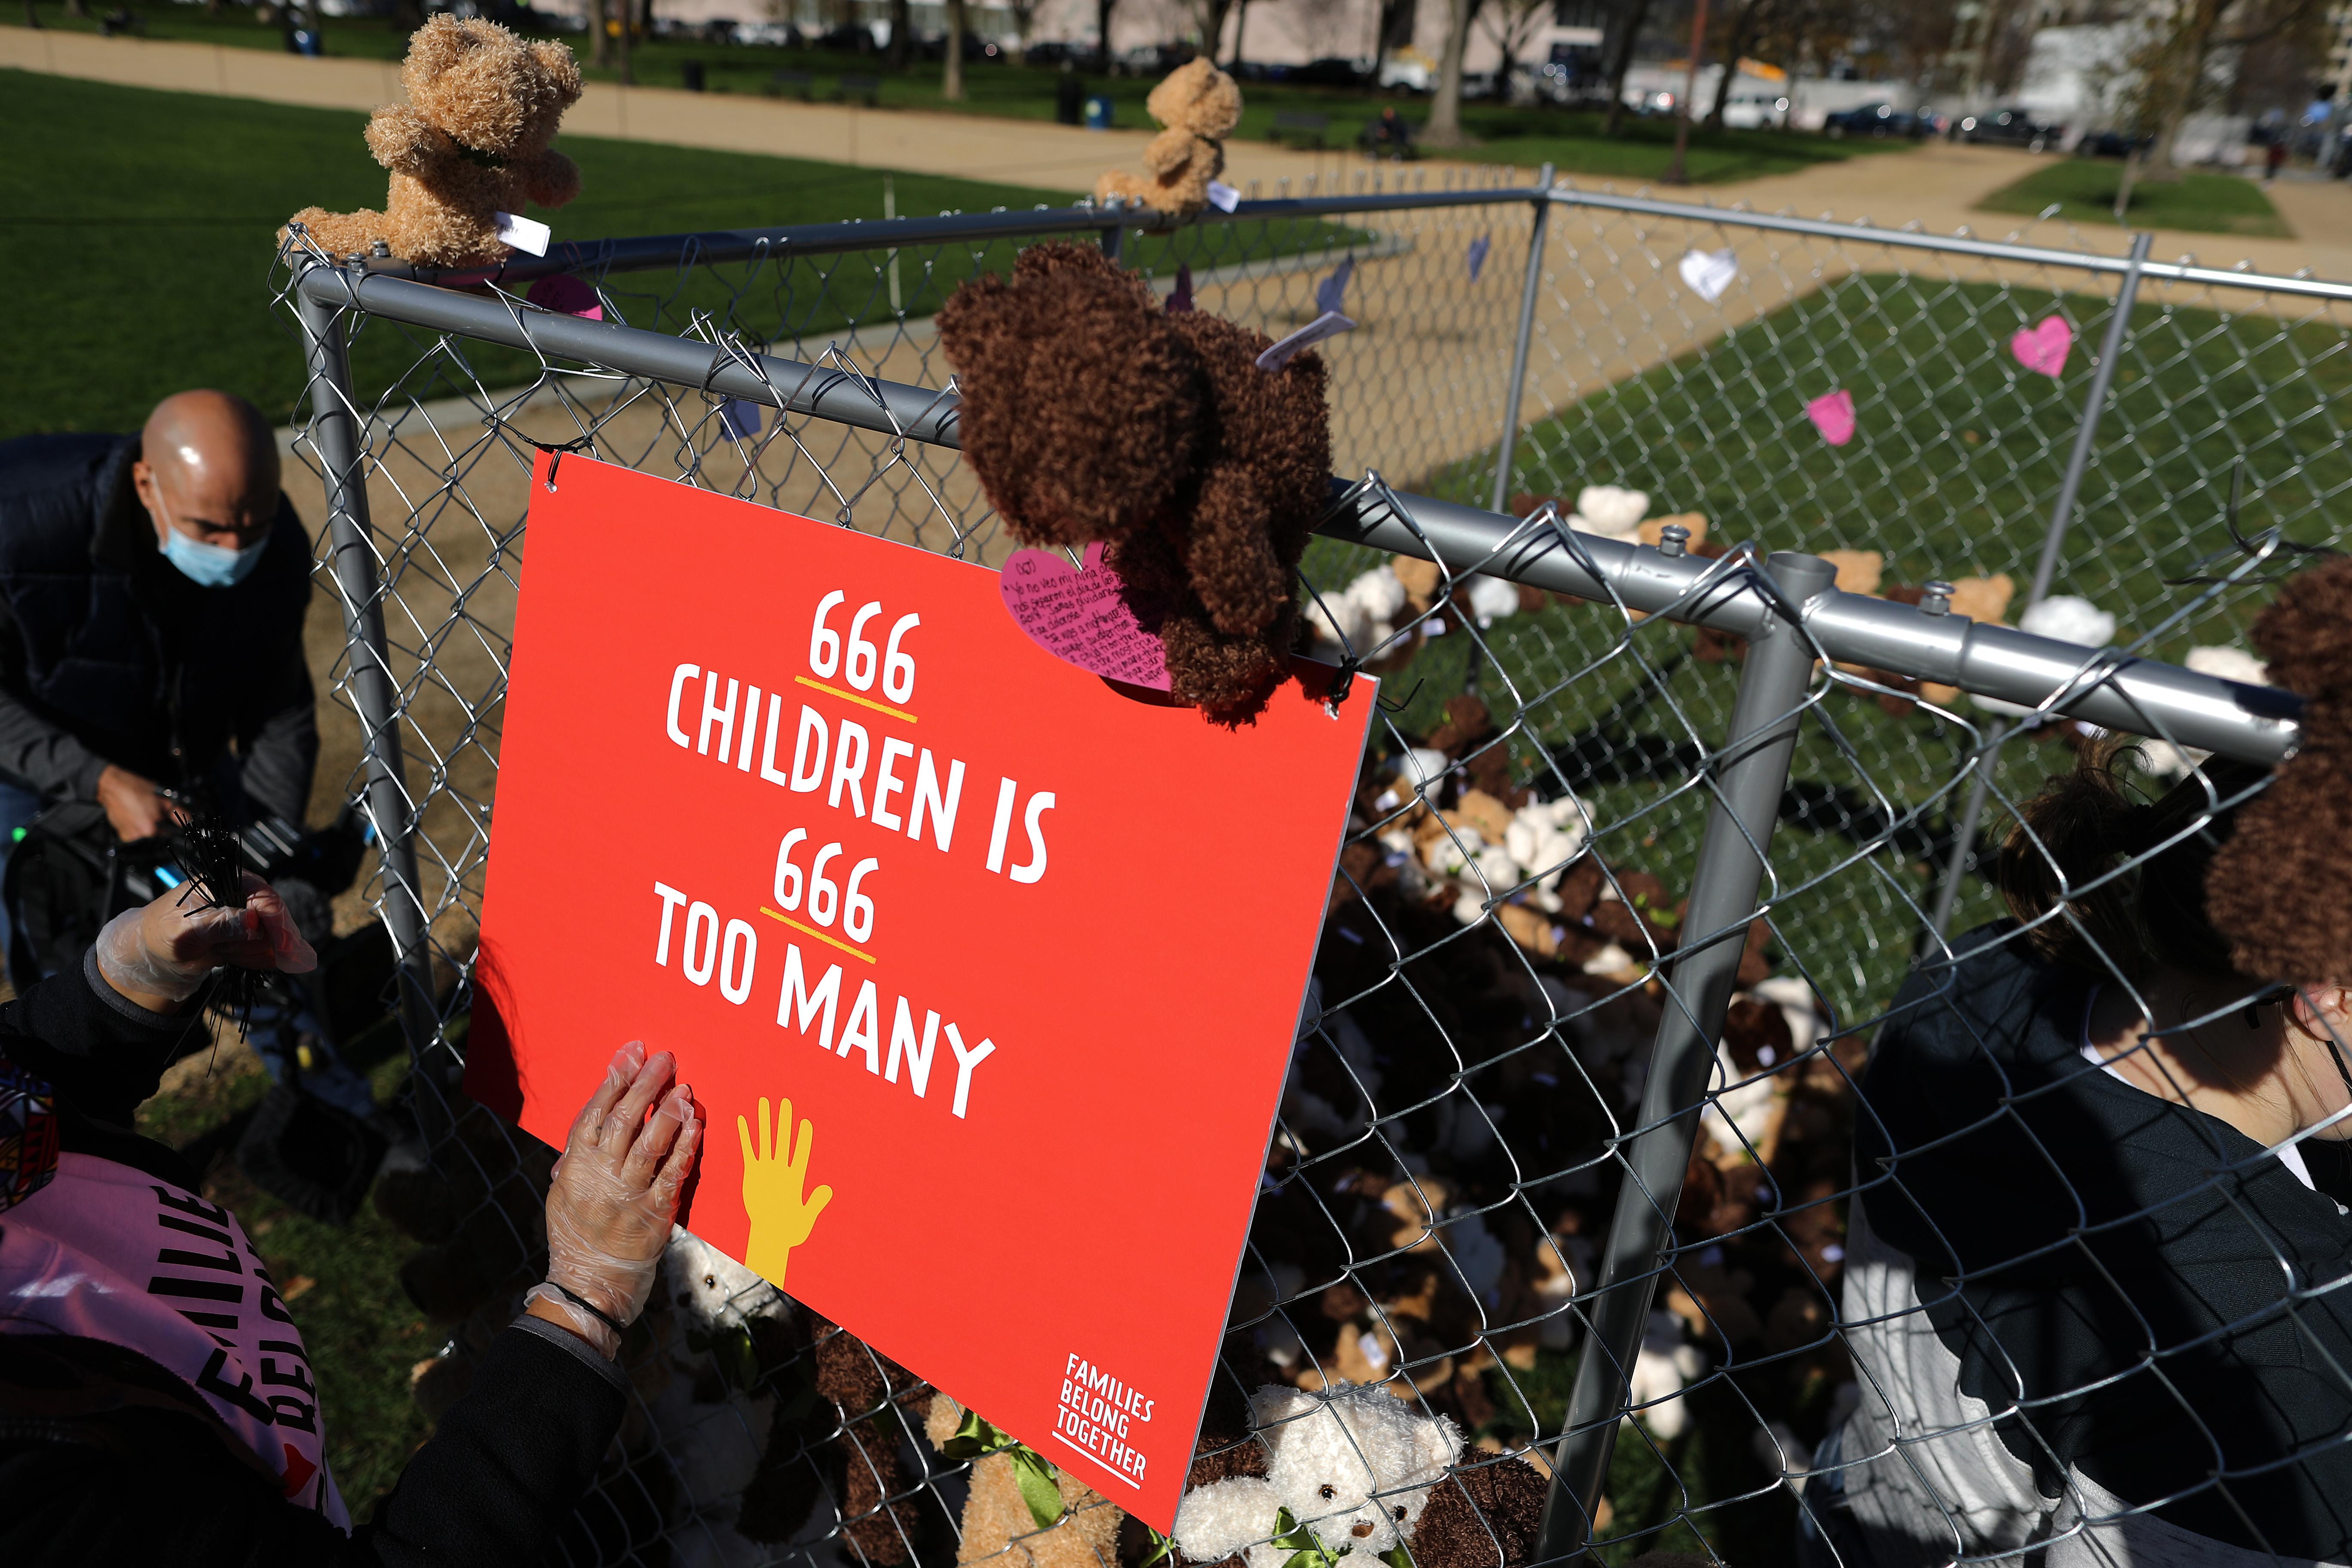 A cage full of teddy bears with a sign on it that says "666 children is 666 too many"